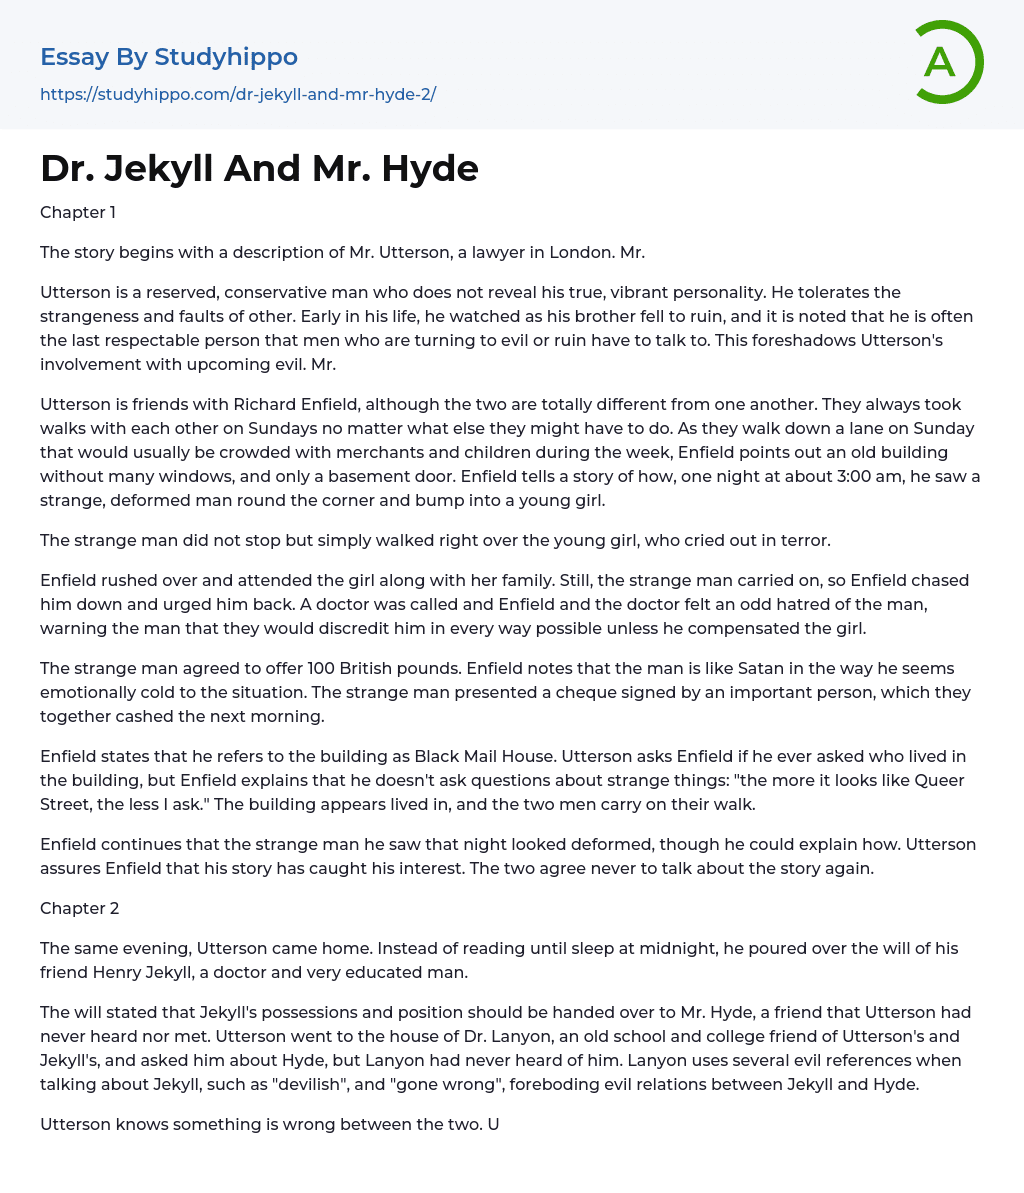 jekyll and hyde duality essay plan